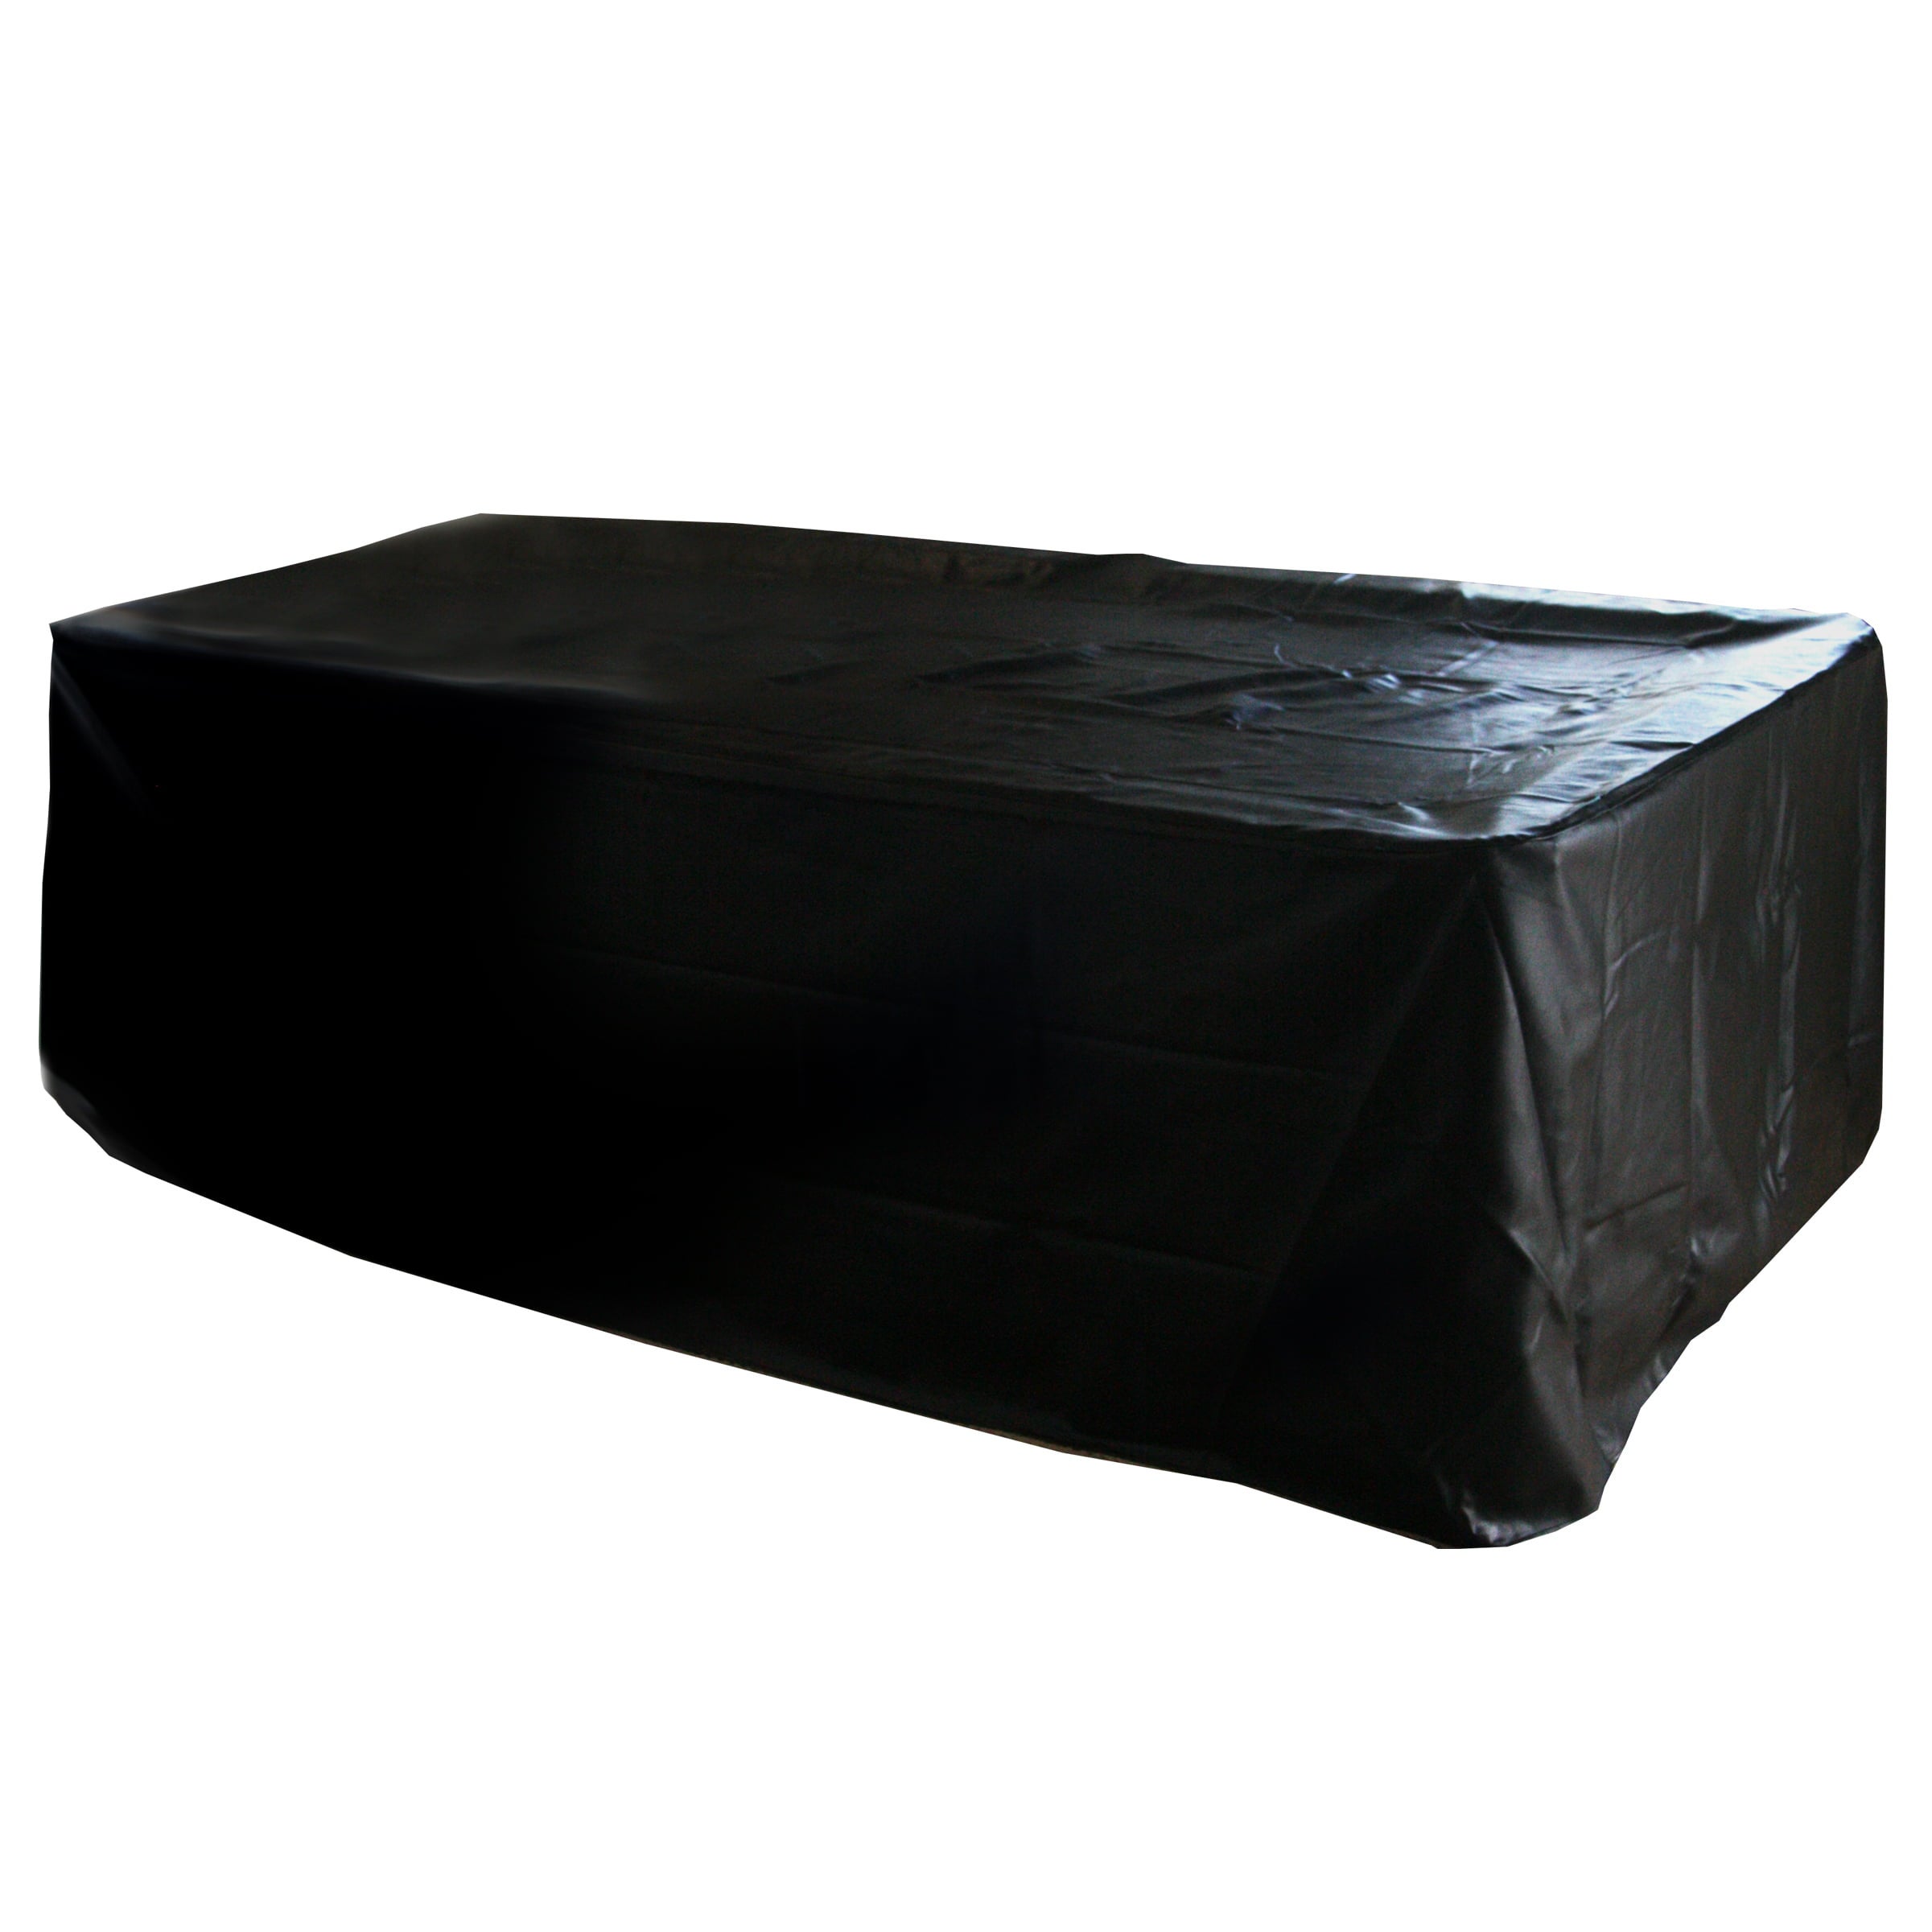 8ft Heavy Duty Pool Snooker Billiard Table Cover to the floor with 830mm drop!